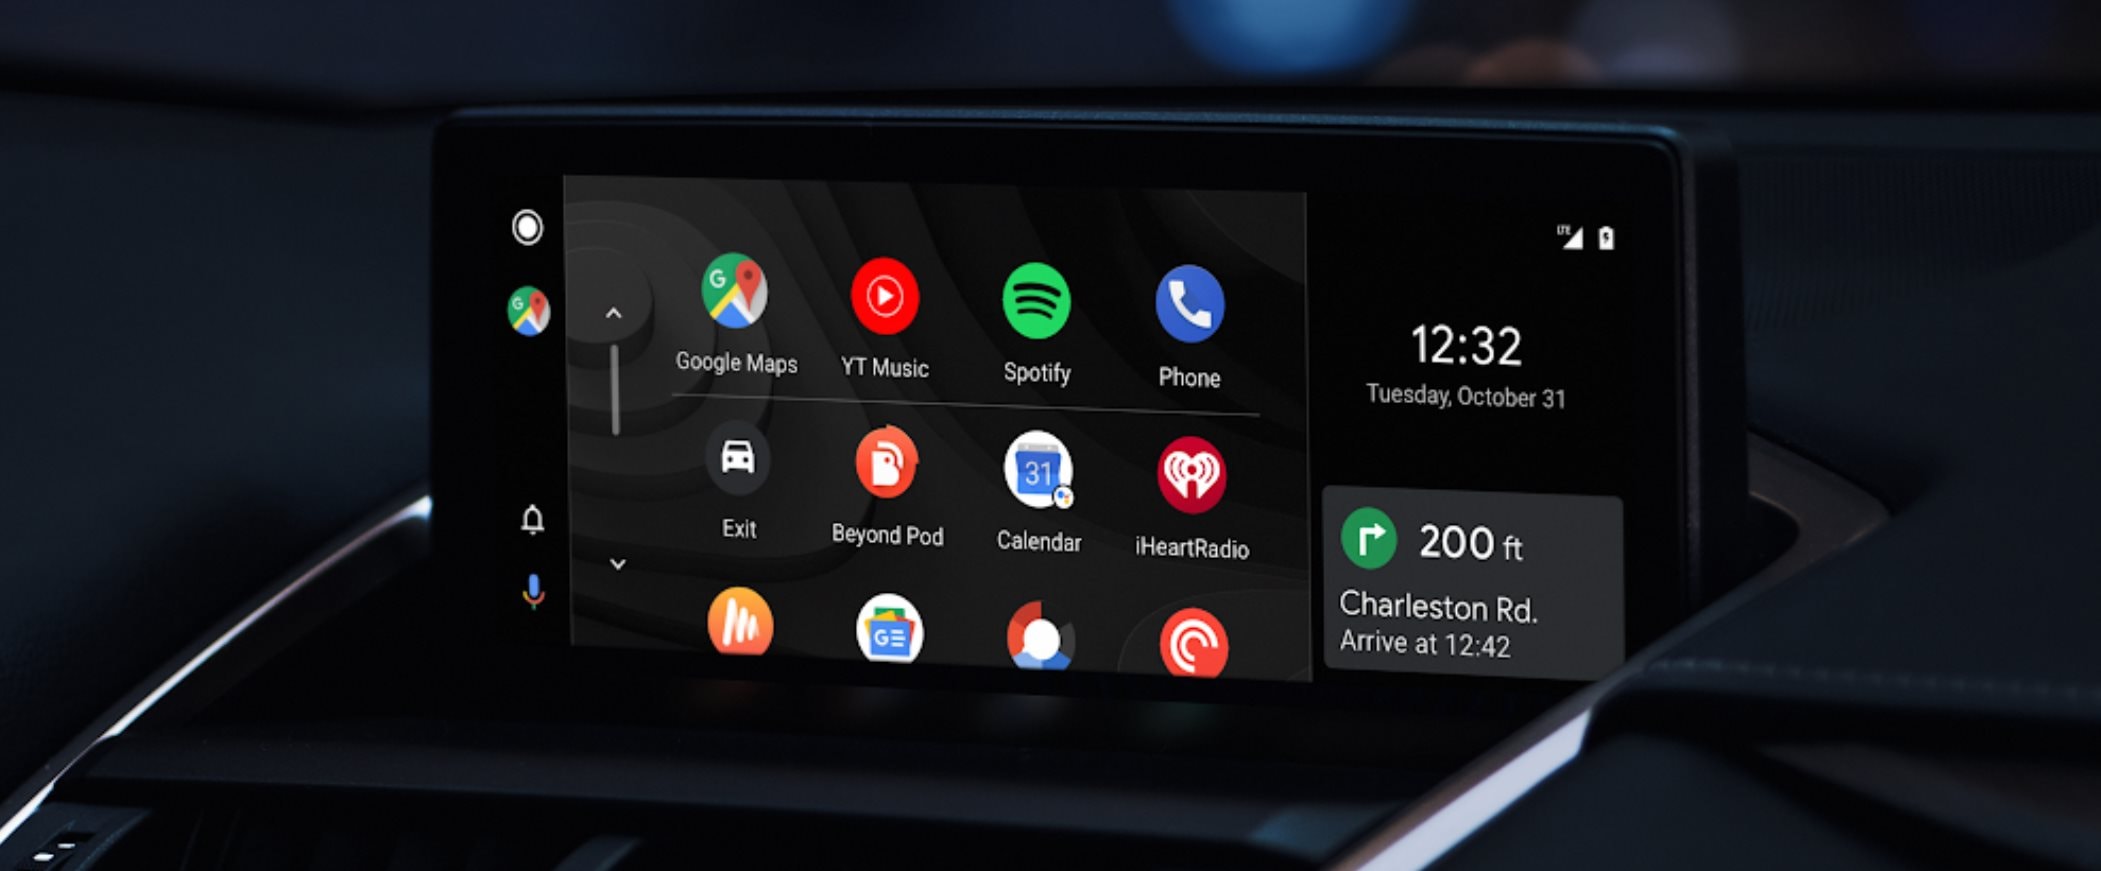 Google Finally Releases New Android Auto Version, Major